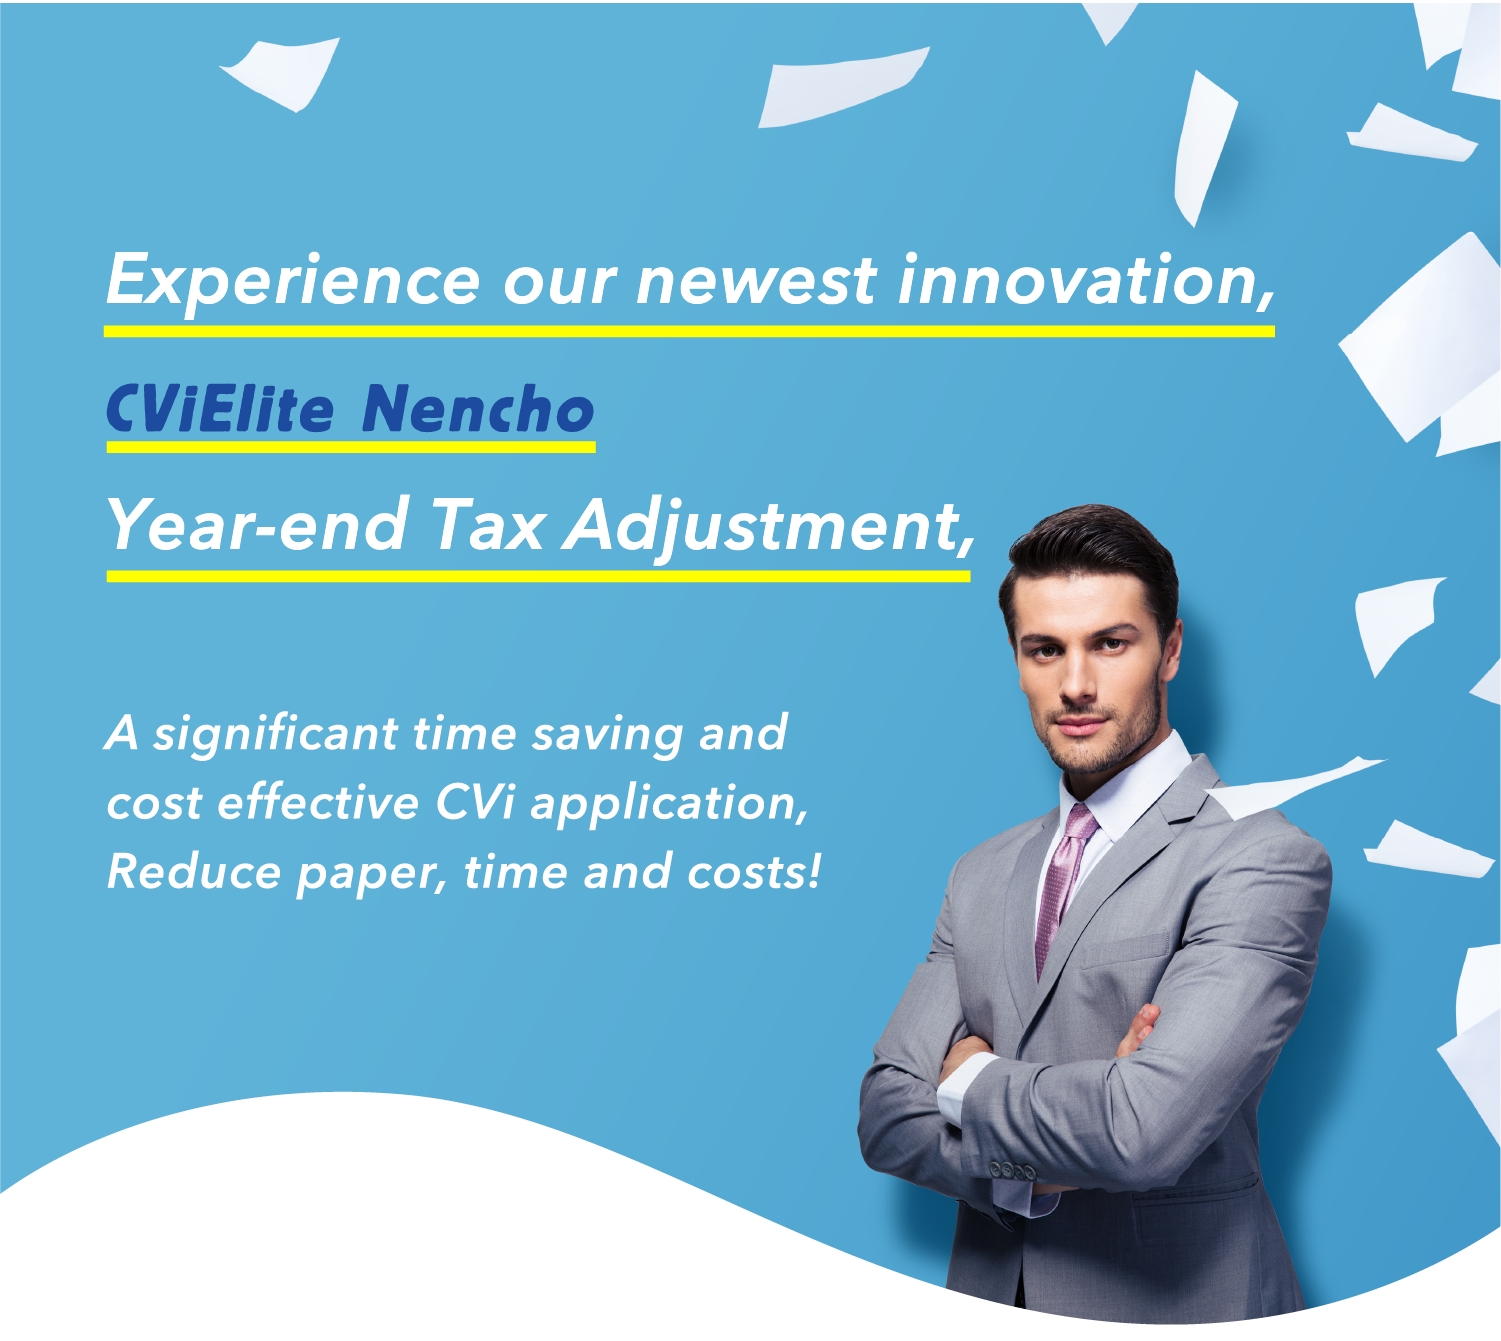 Experience our newest innovation, CViElite Nencho Year-end Tax Adjustment, A significant time saving and cost effective CVi application,
Reduce paper, time and costs!